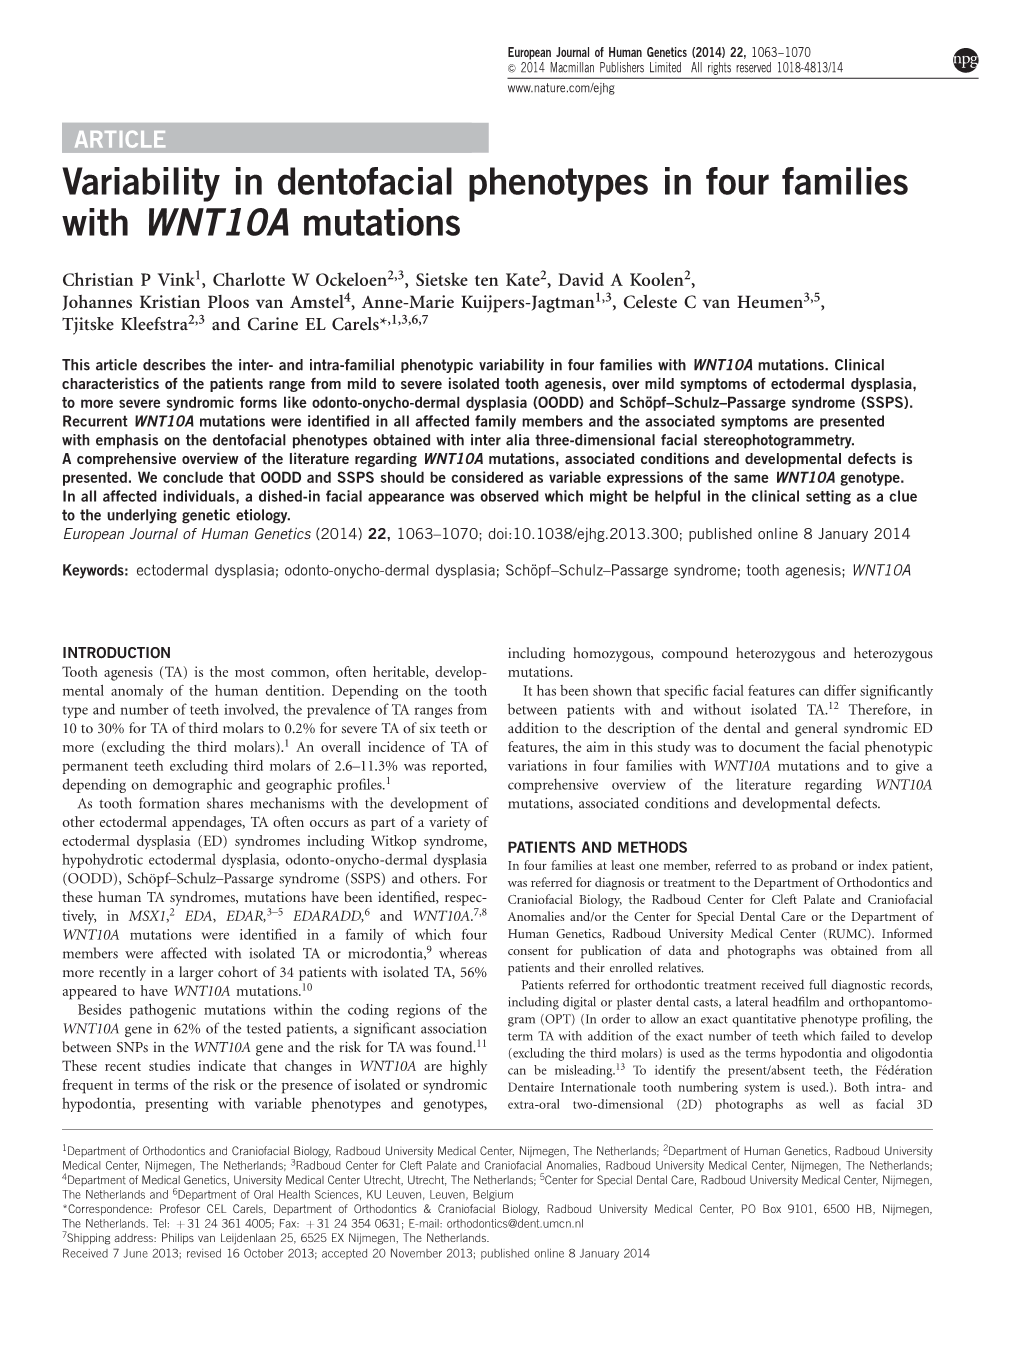 Variability in Dentofacial Phenotypes in Four Families with WNT10A Mutations